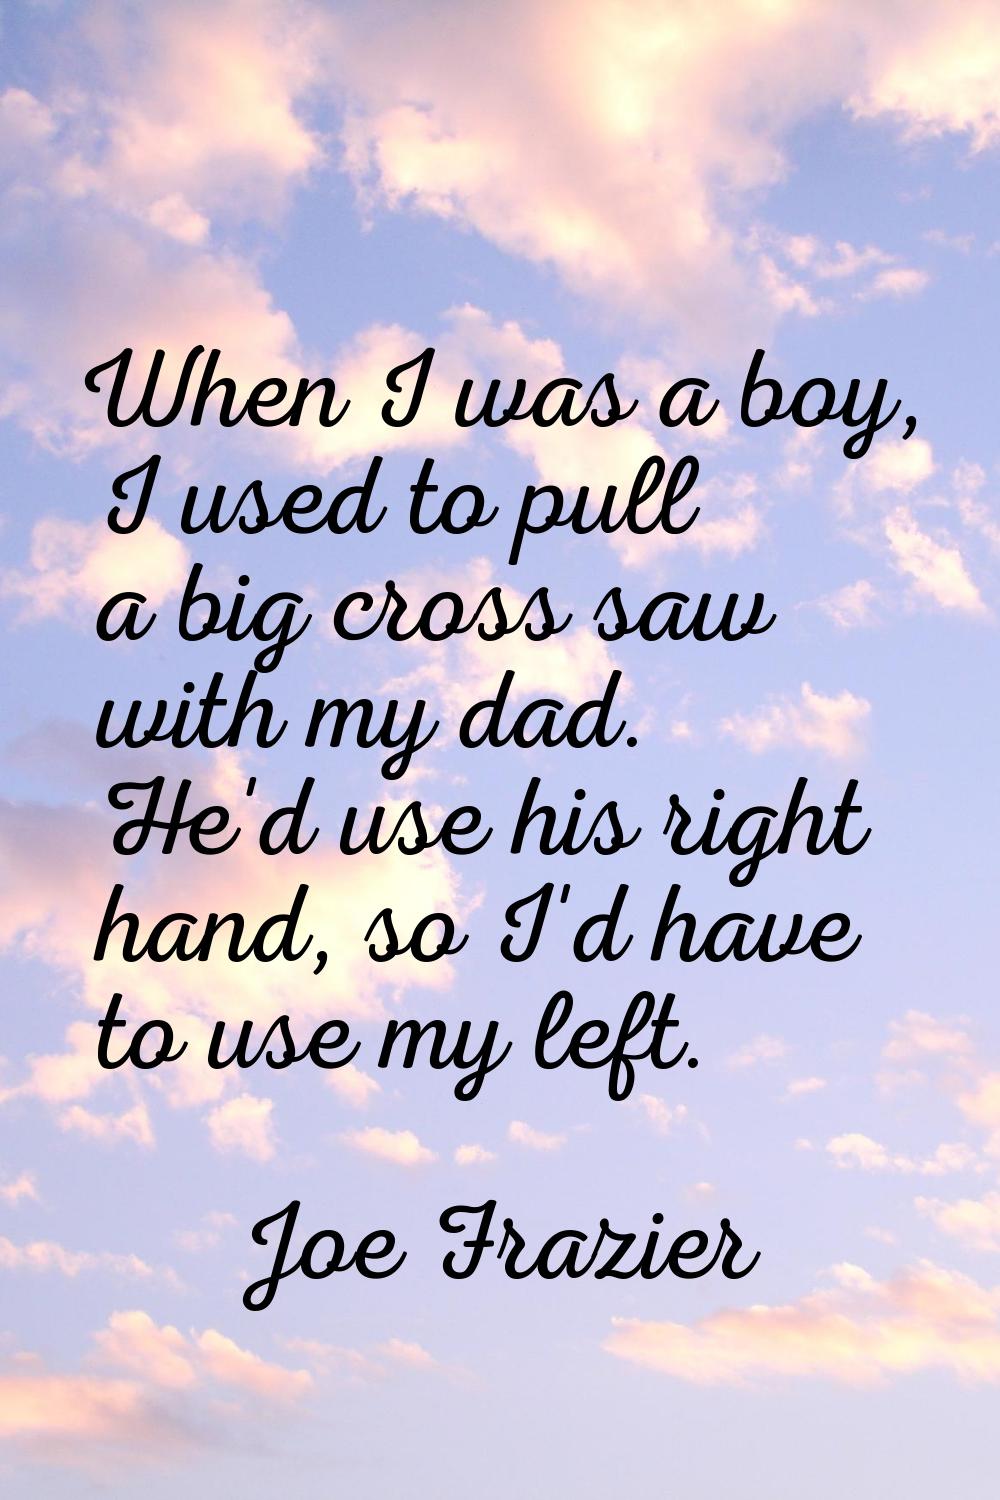 When I was a boy, I used to pull a big cross saw with my dad. He'd use his right hand, so I'd have 